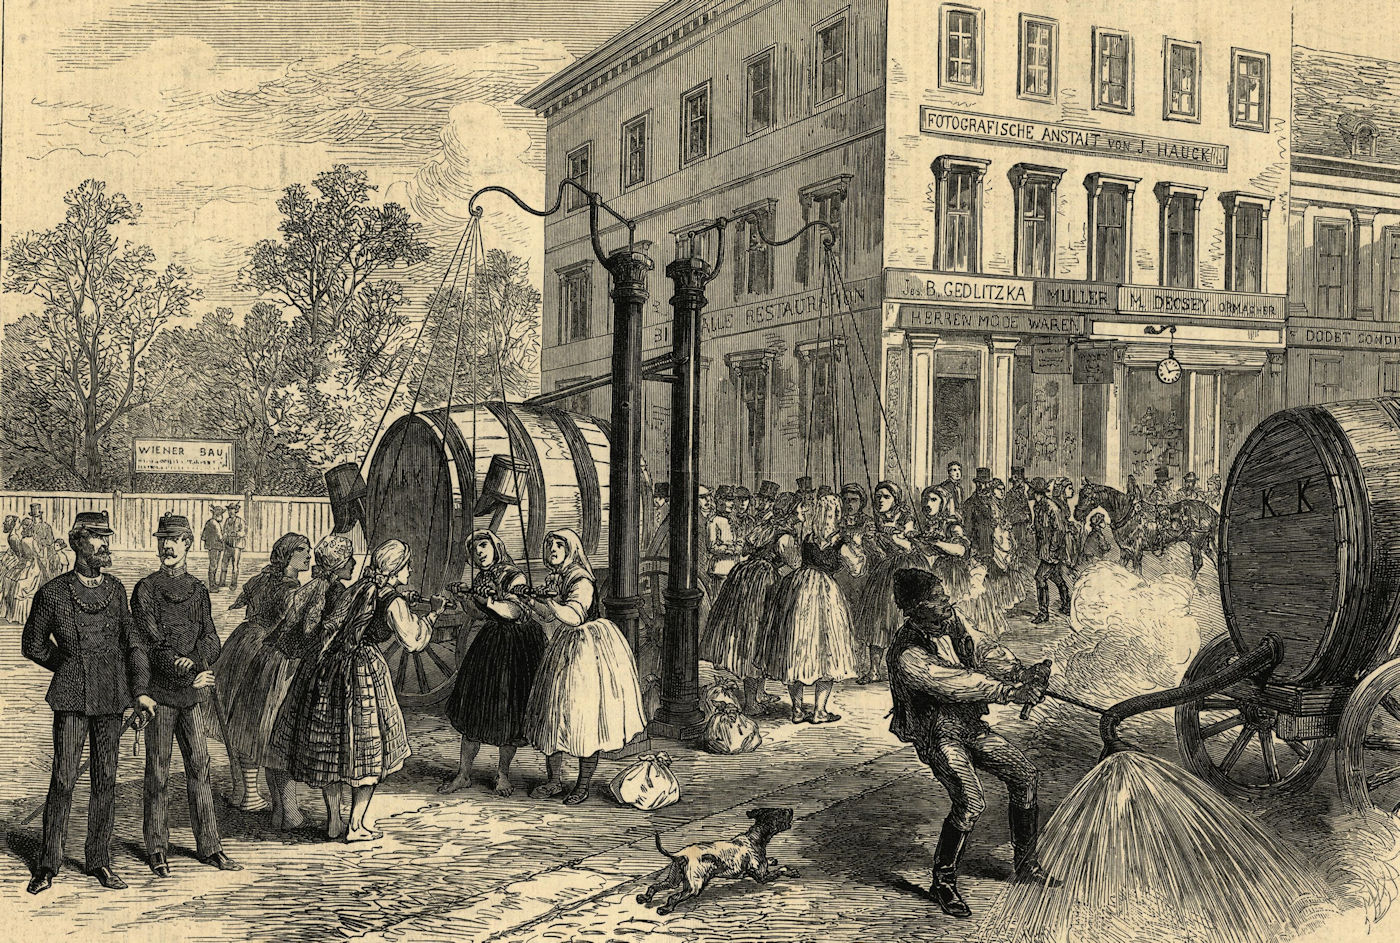 Associate Product Sketches in Vienna: watering the street. Austria 1873 antique ILN full page